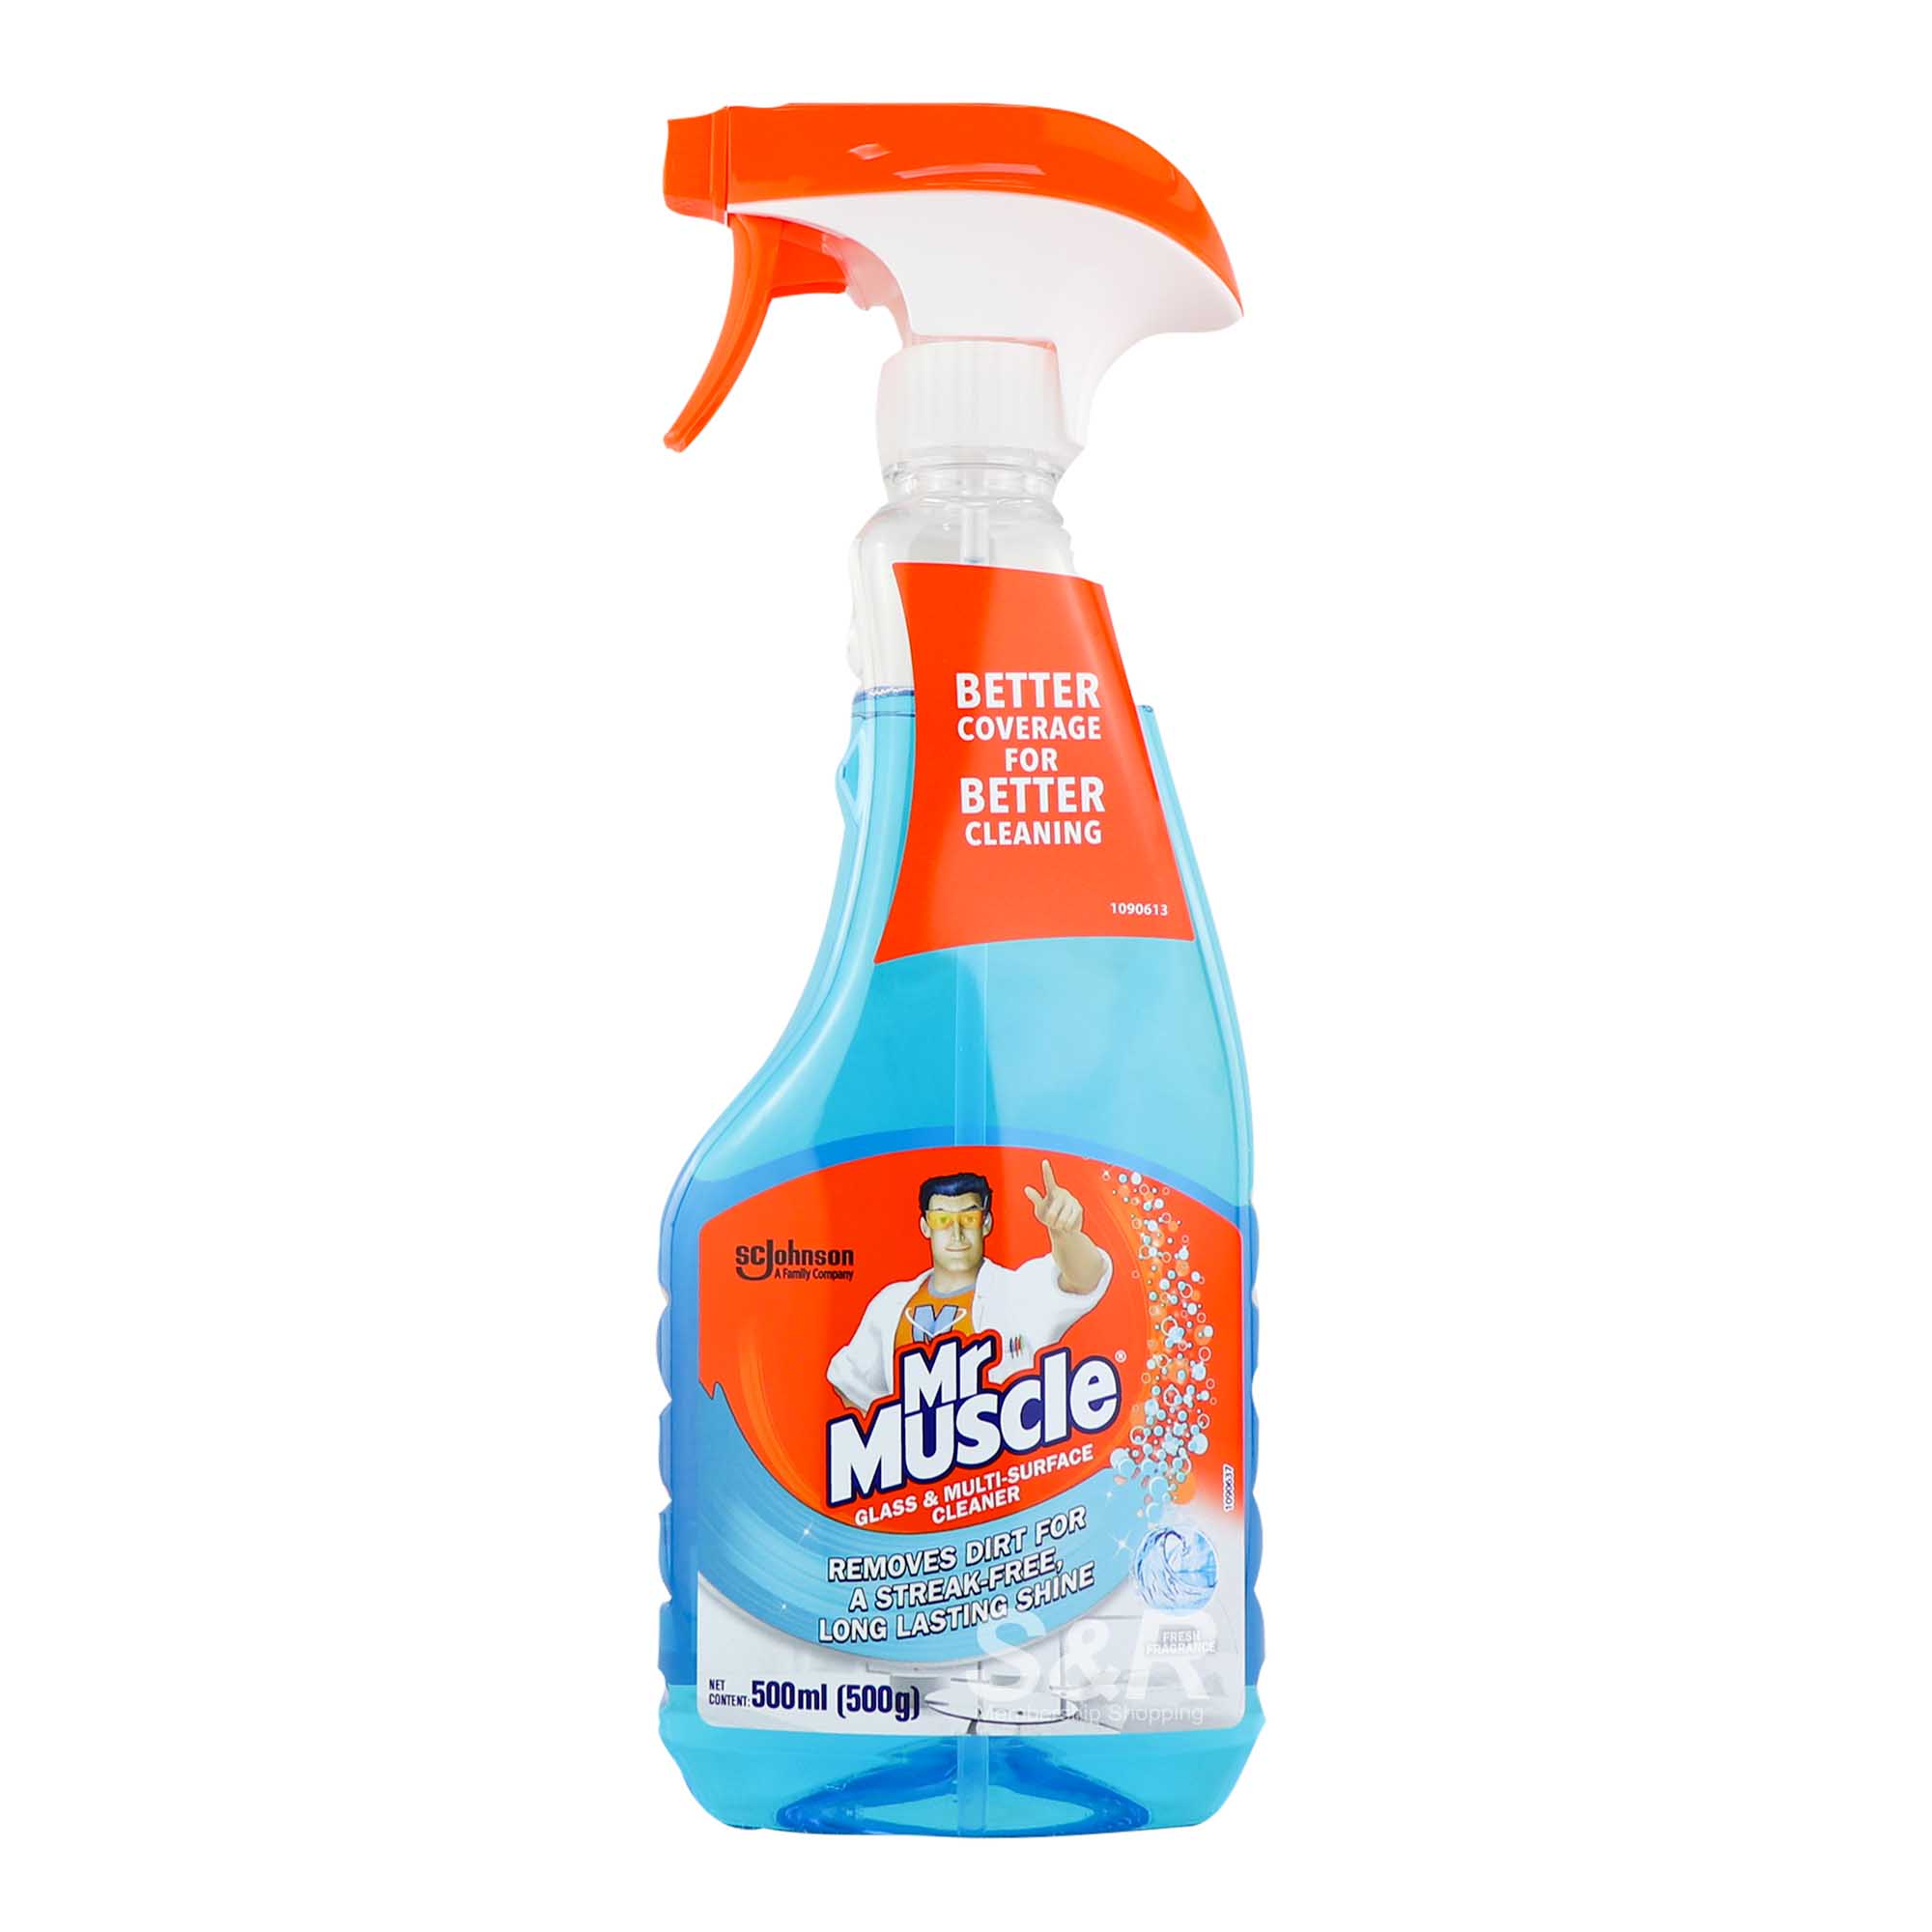 Mr Muscle Glass & Multi-surface Cleaner 500g